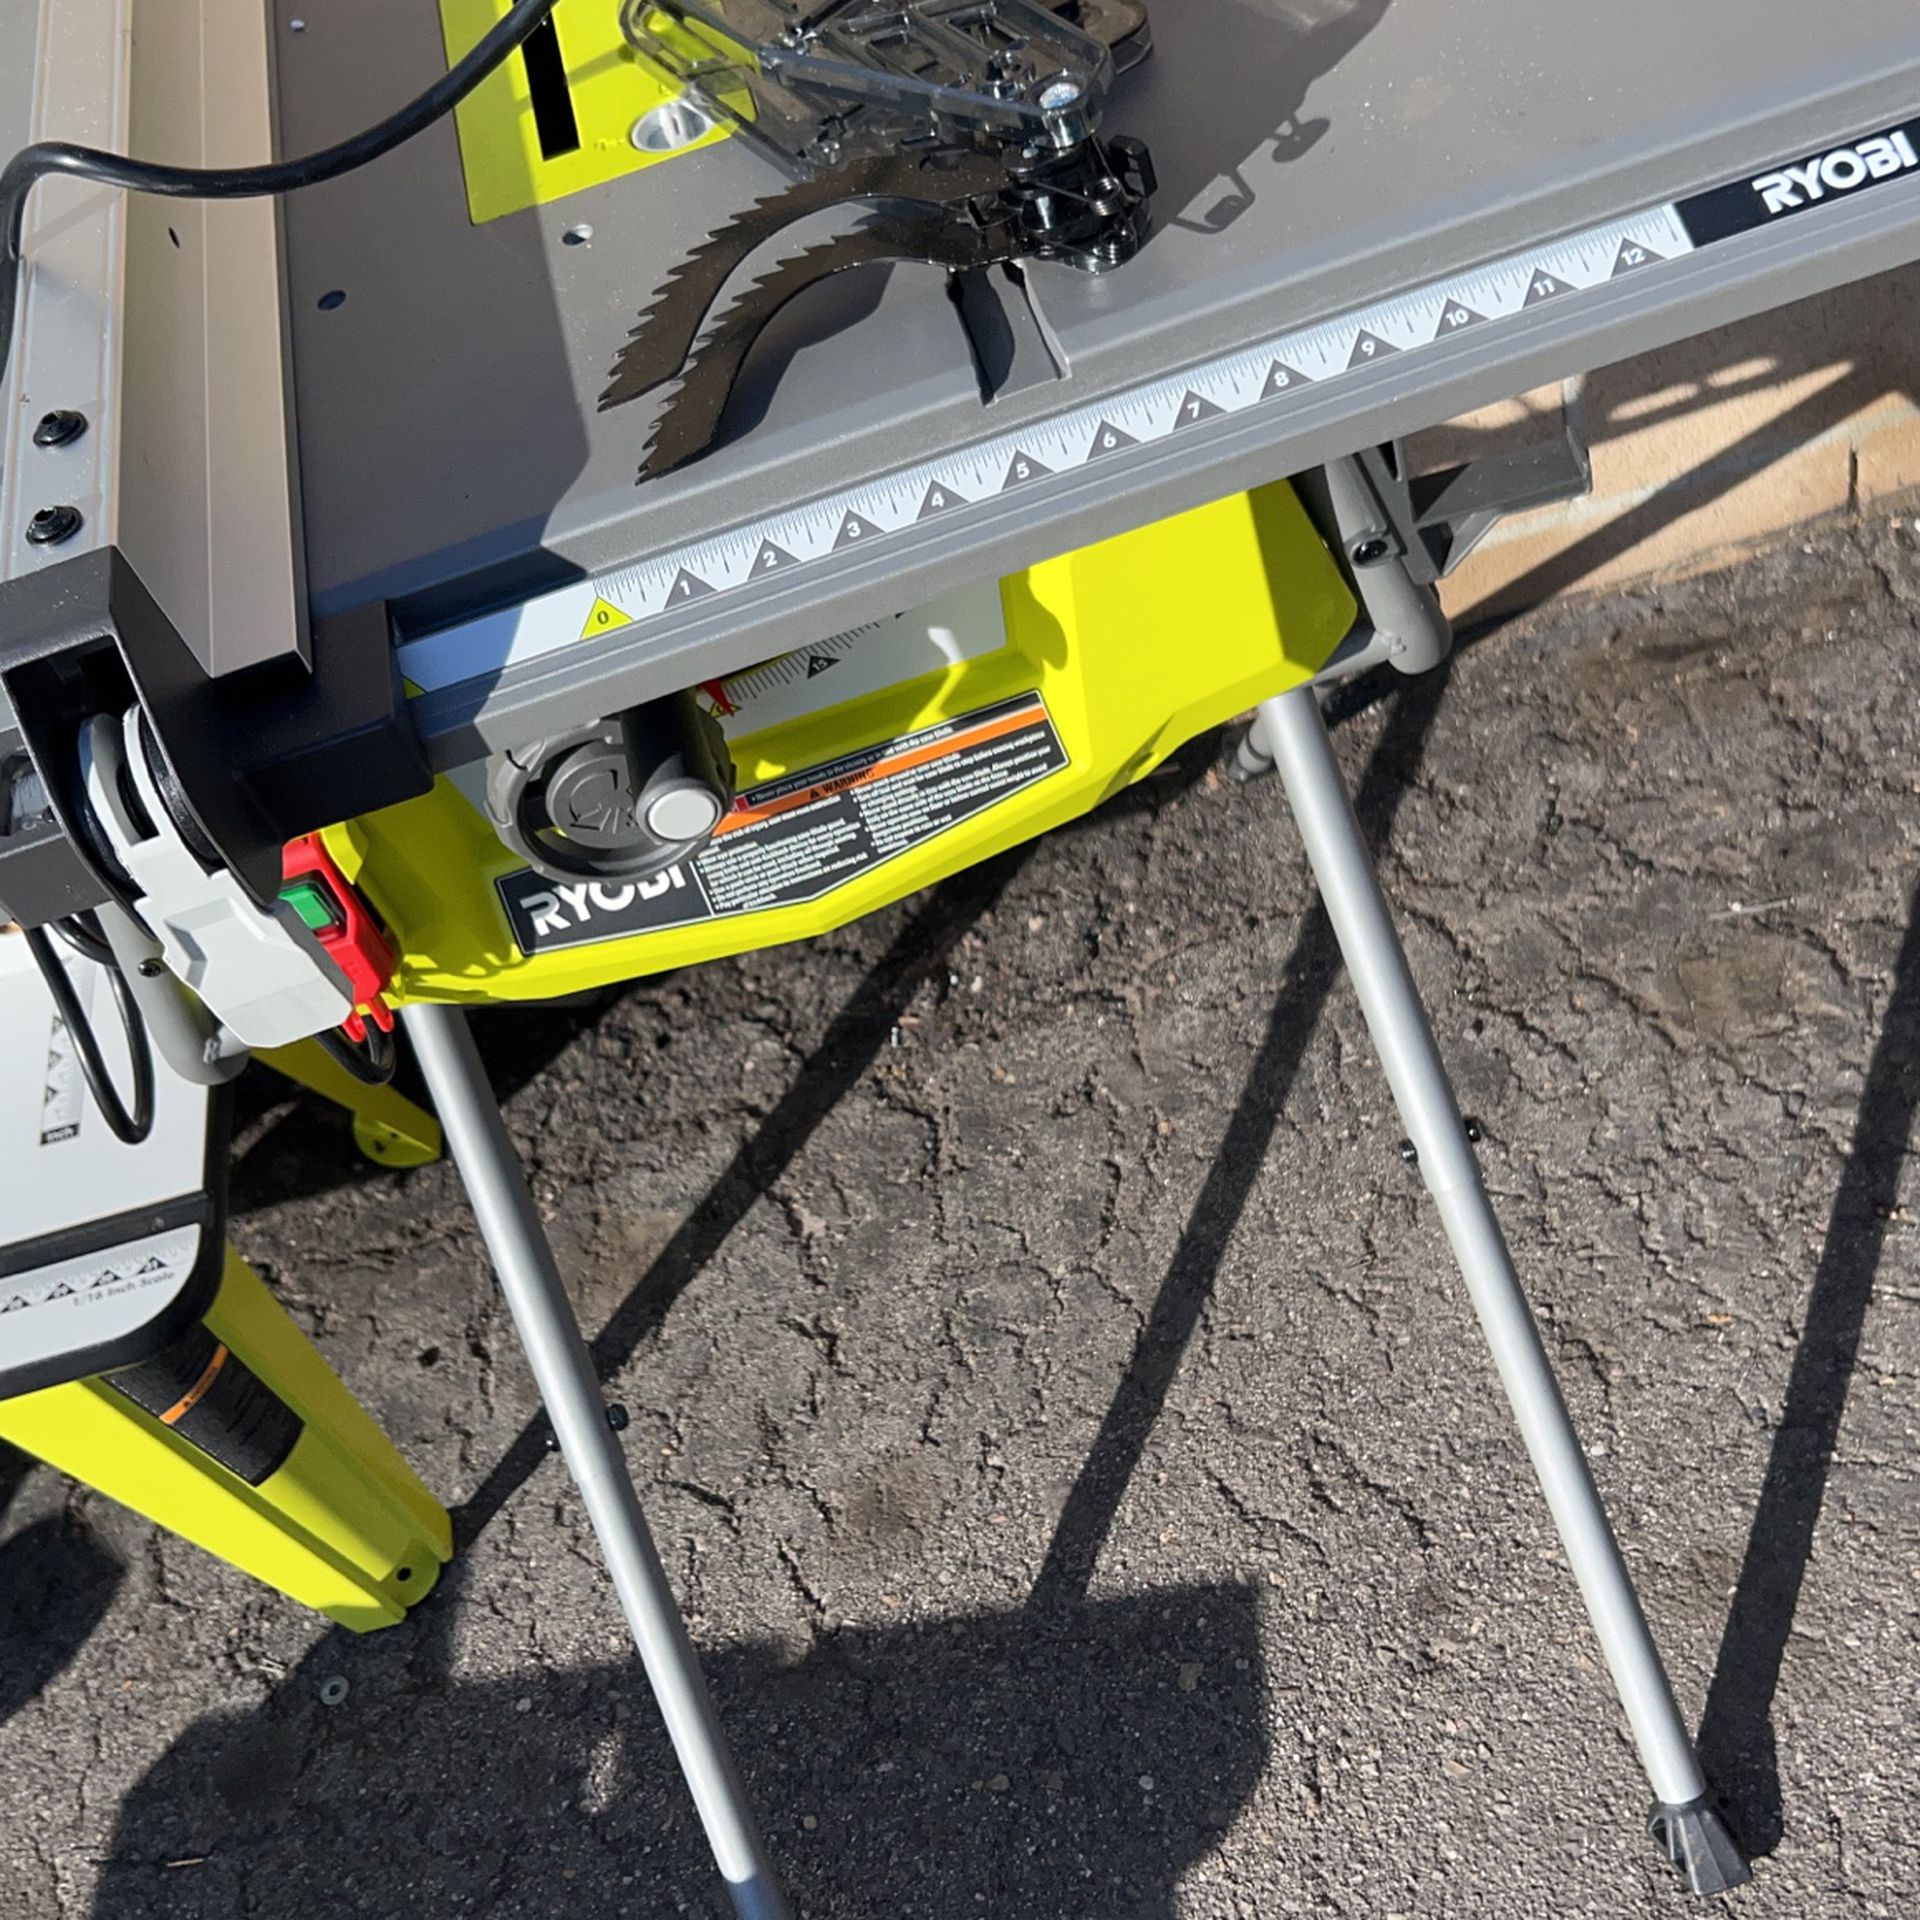 Ryobi 10 Inch Table Saw With Stand For Sale In Garden Grove Ca Offerup